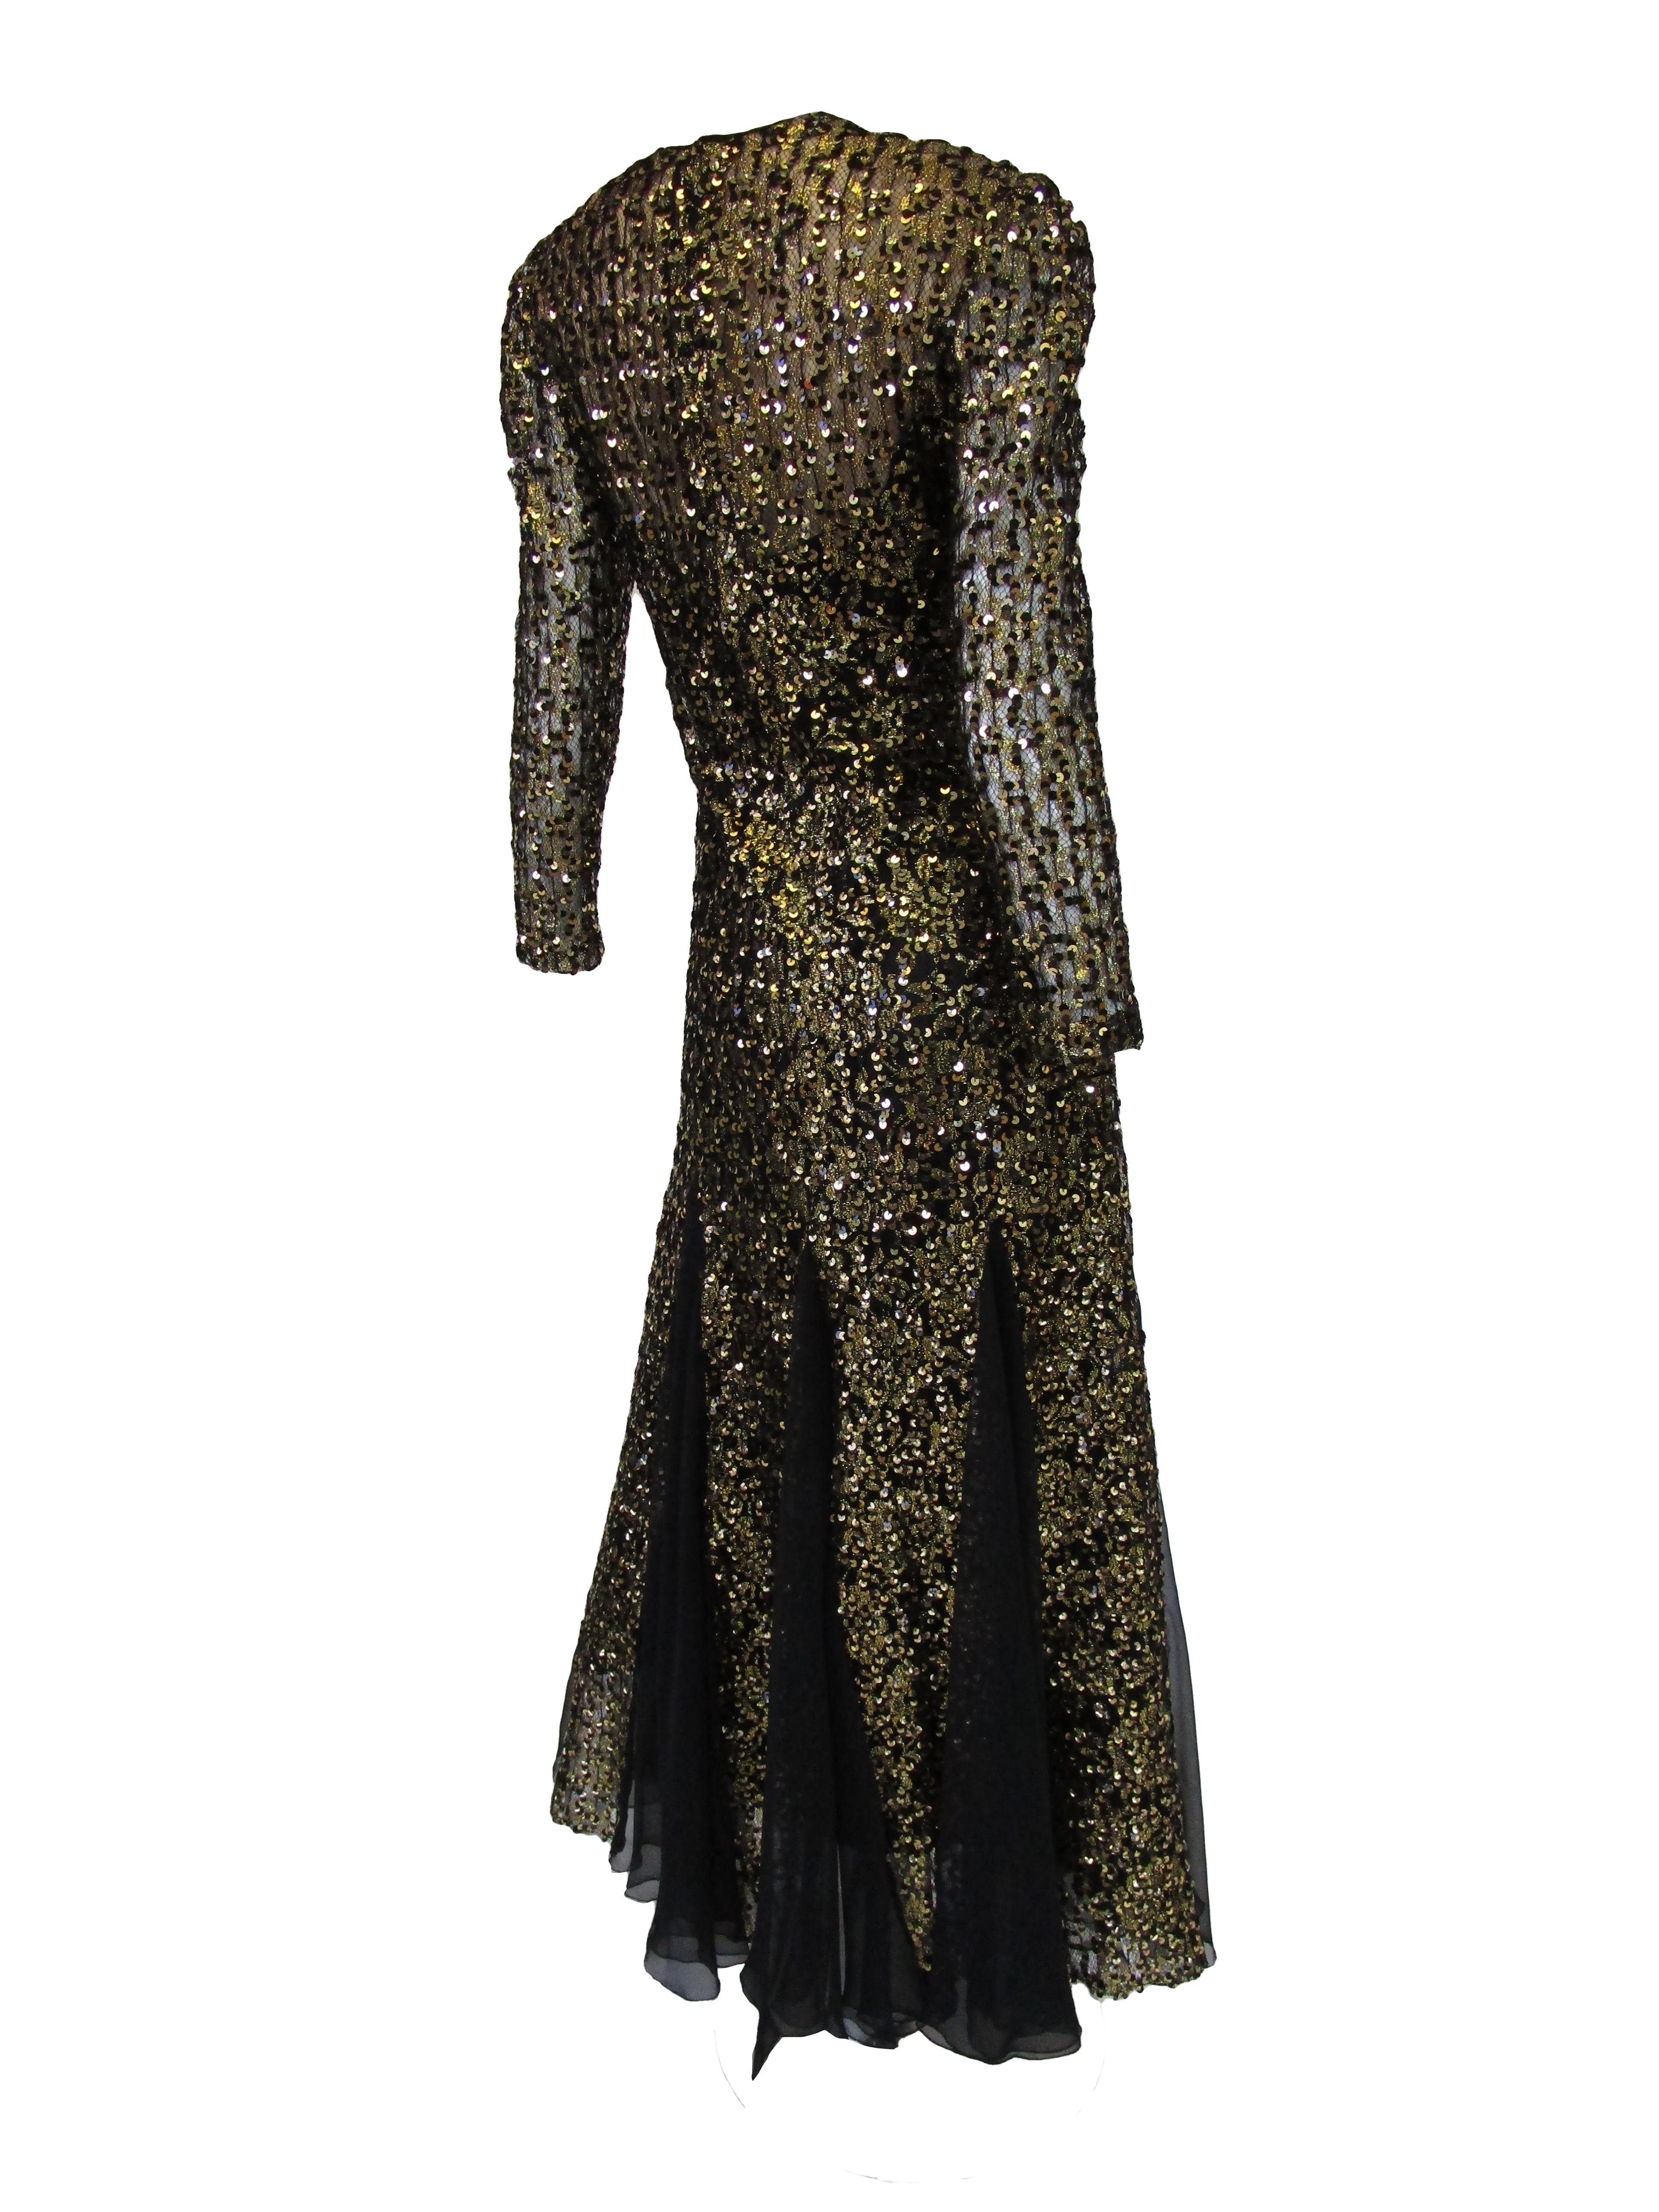 1980s Richilene Black and Gold Sequined Evening Dress  For Sale 4